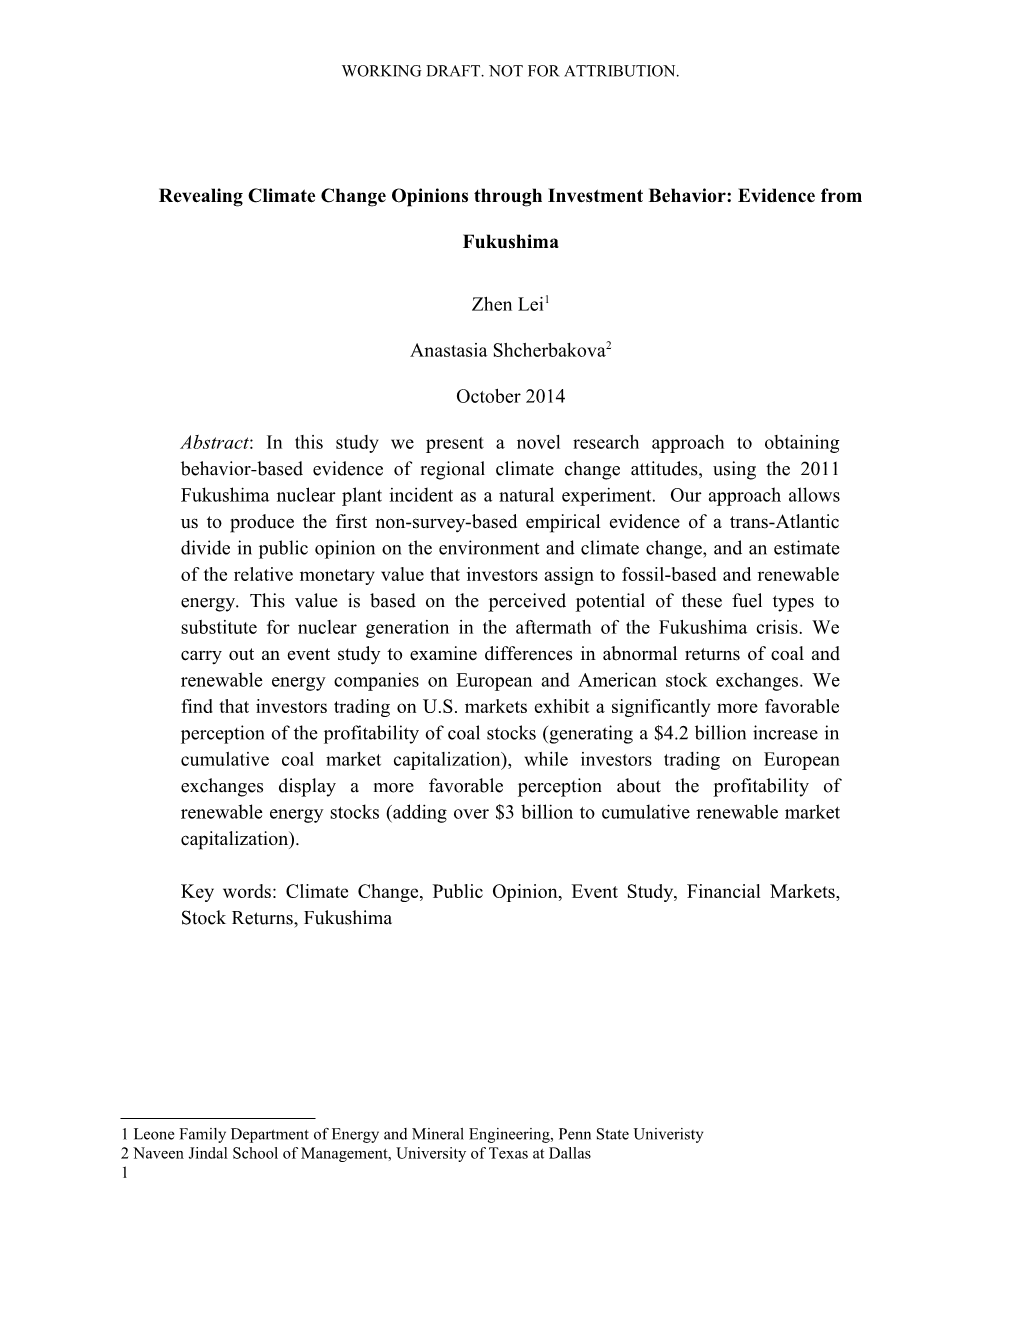 Revealing Climate Changeopinions Throughinvestmentbehavior:Evidence from Fukushima